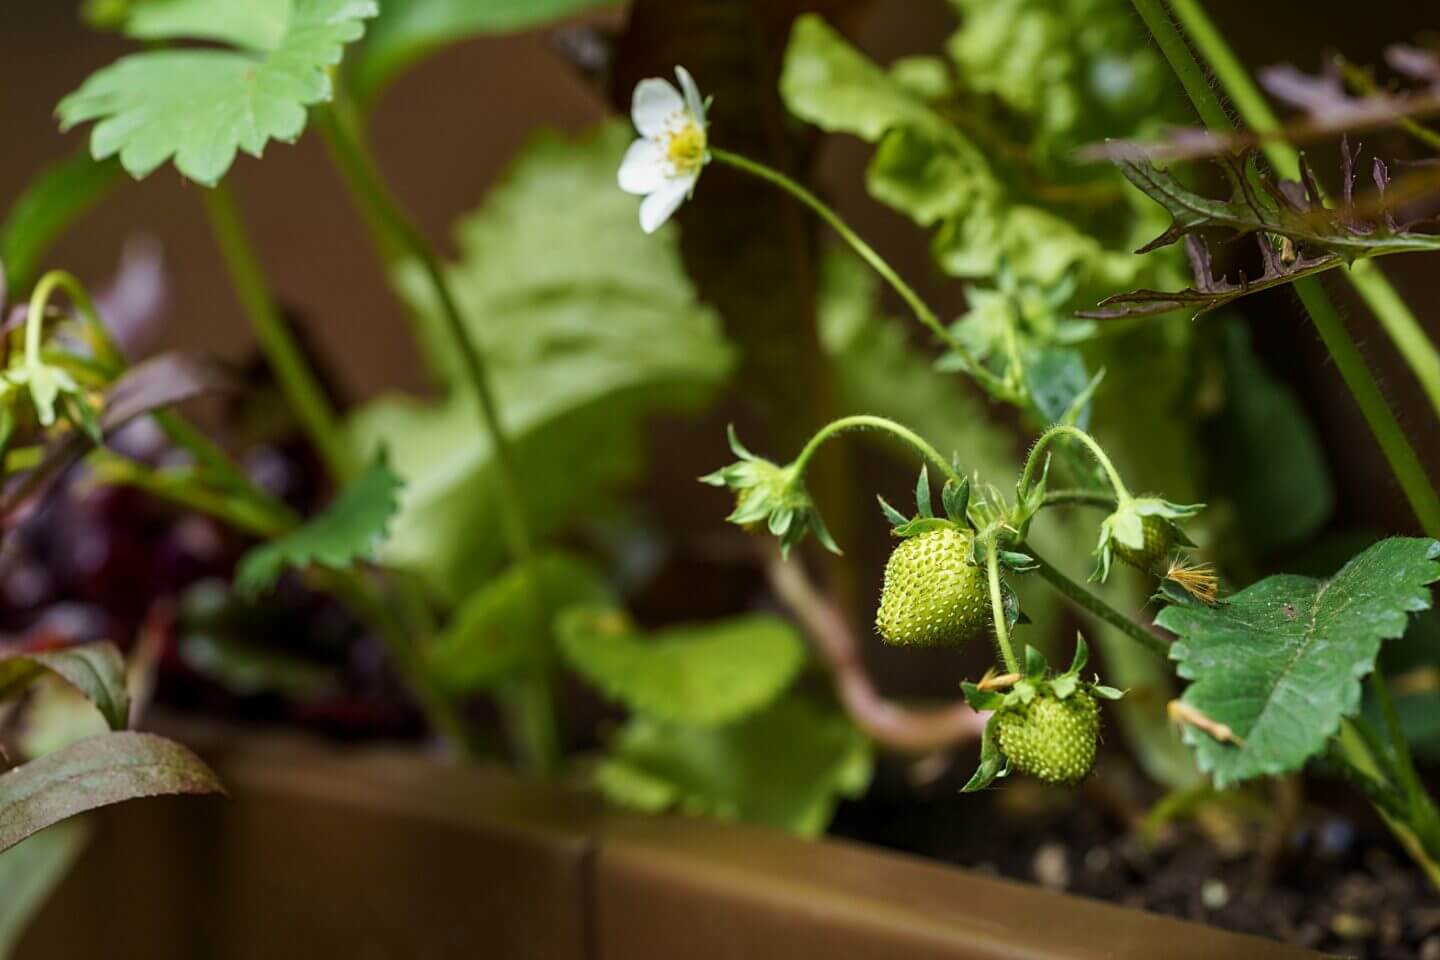 Ripening strawberry plant in brown metal container